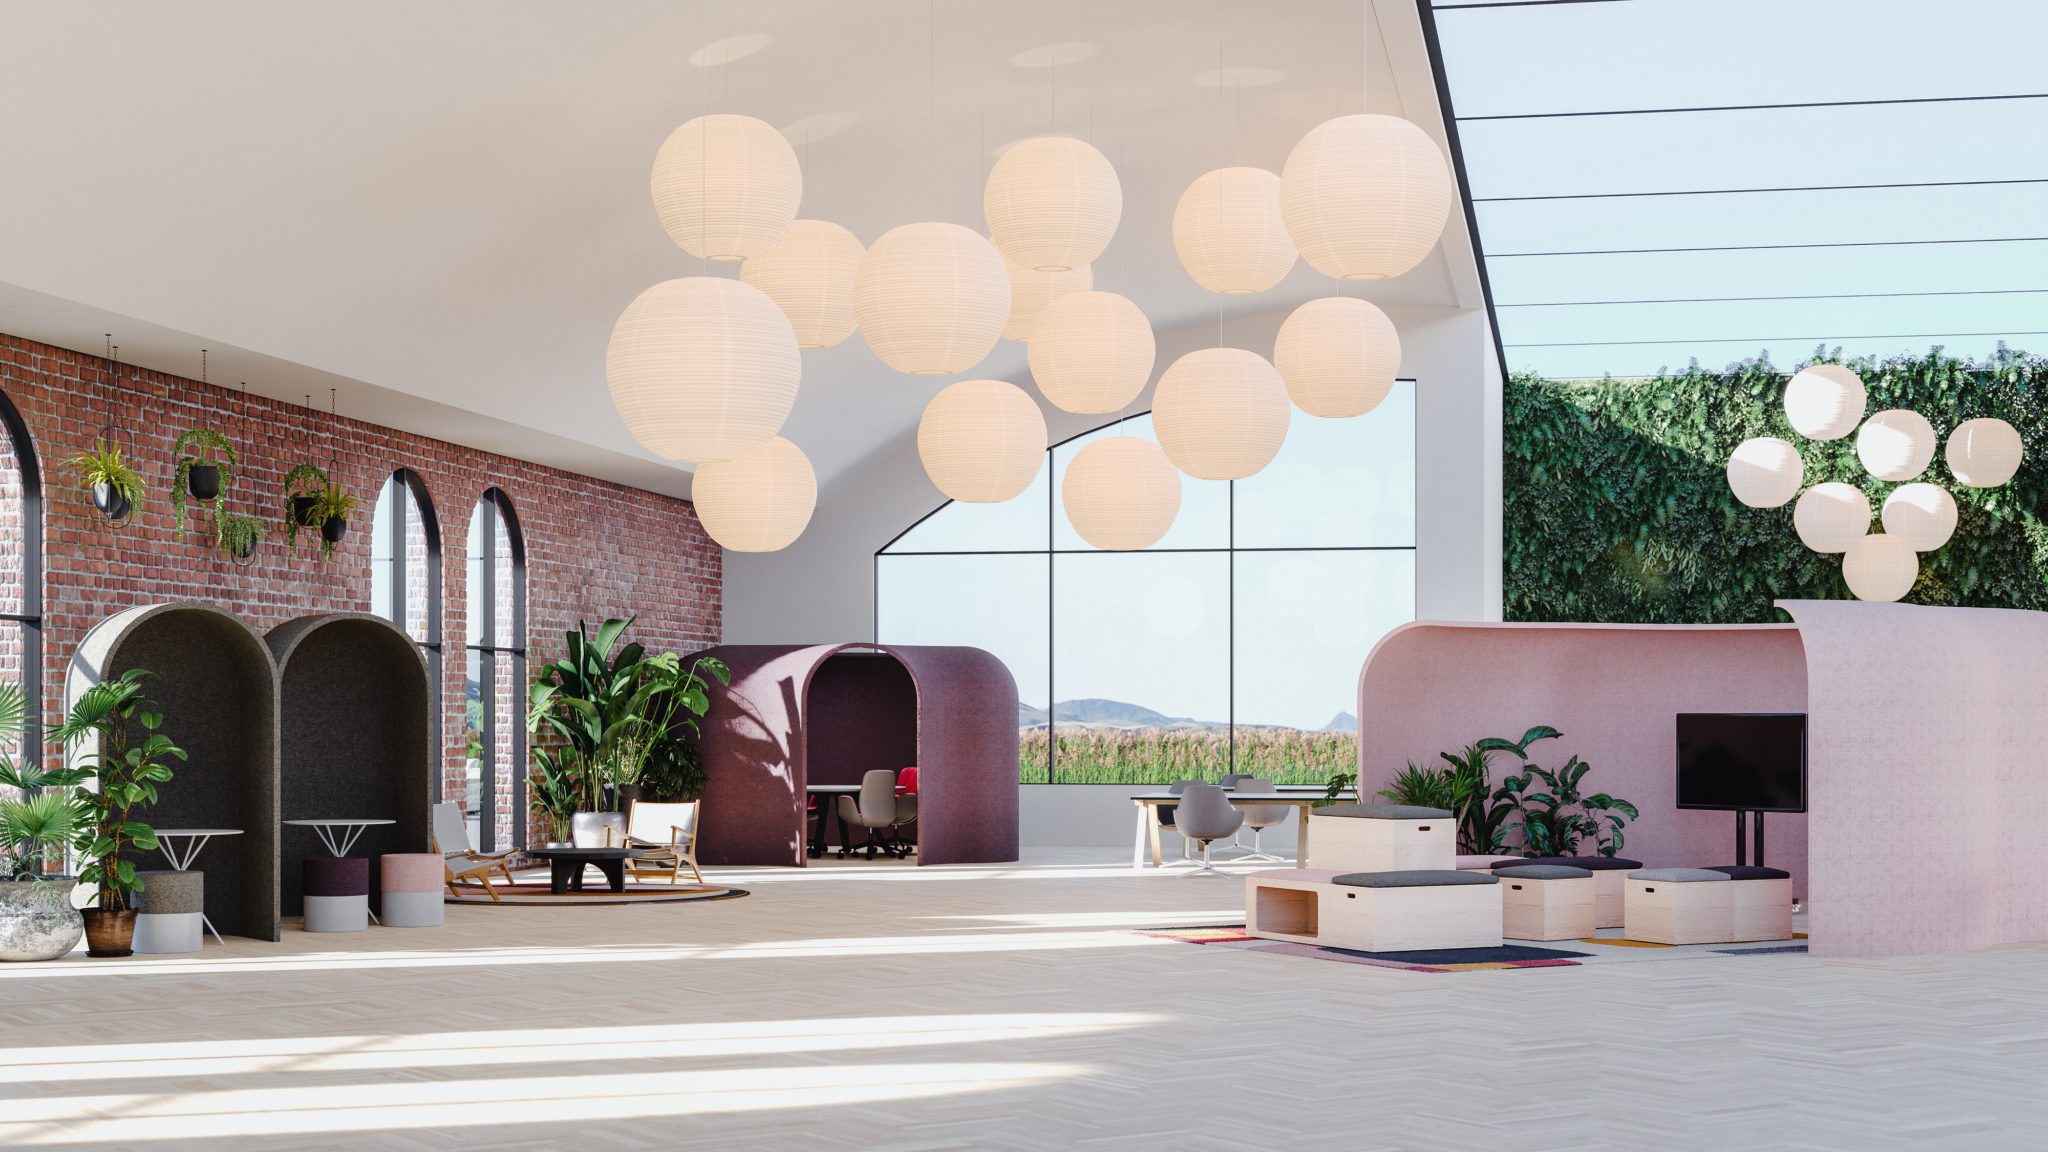 round light fixtures and pink furnishings